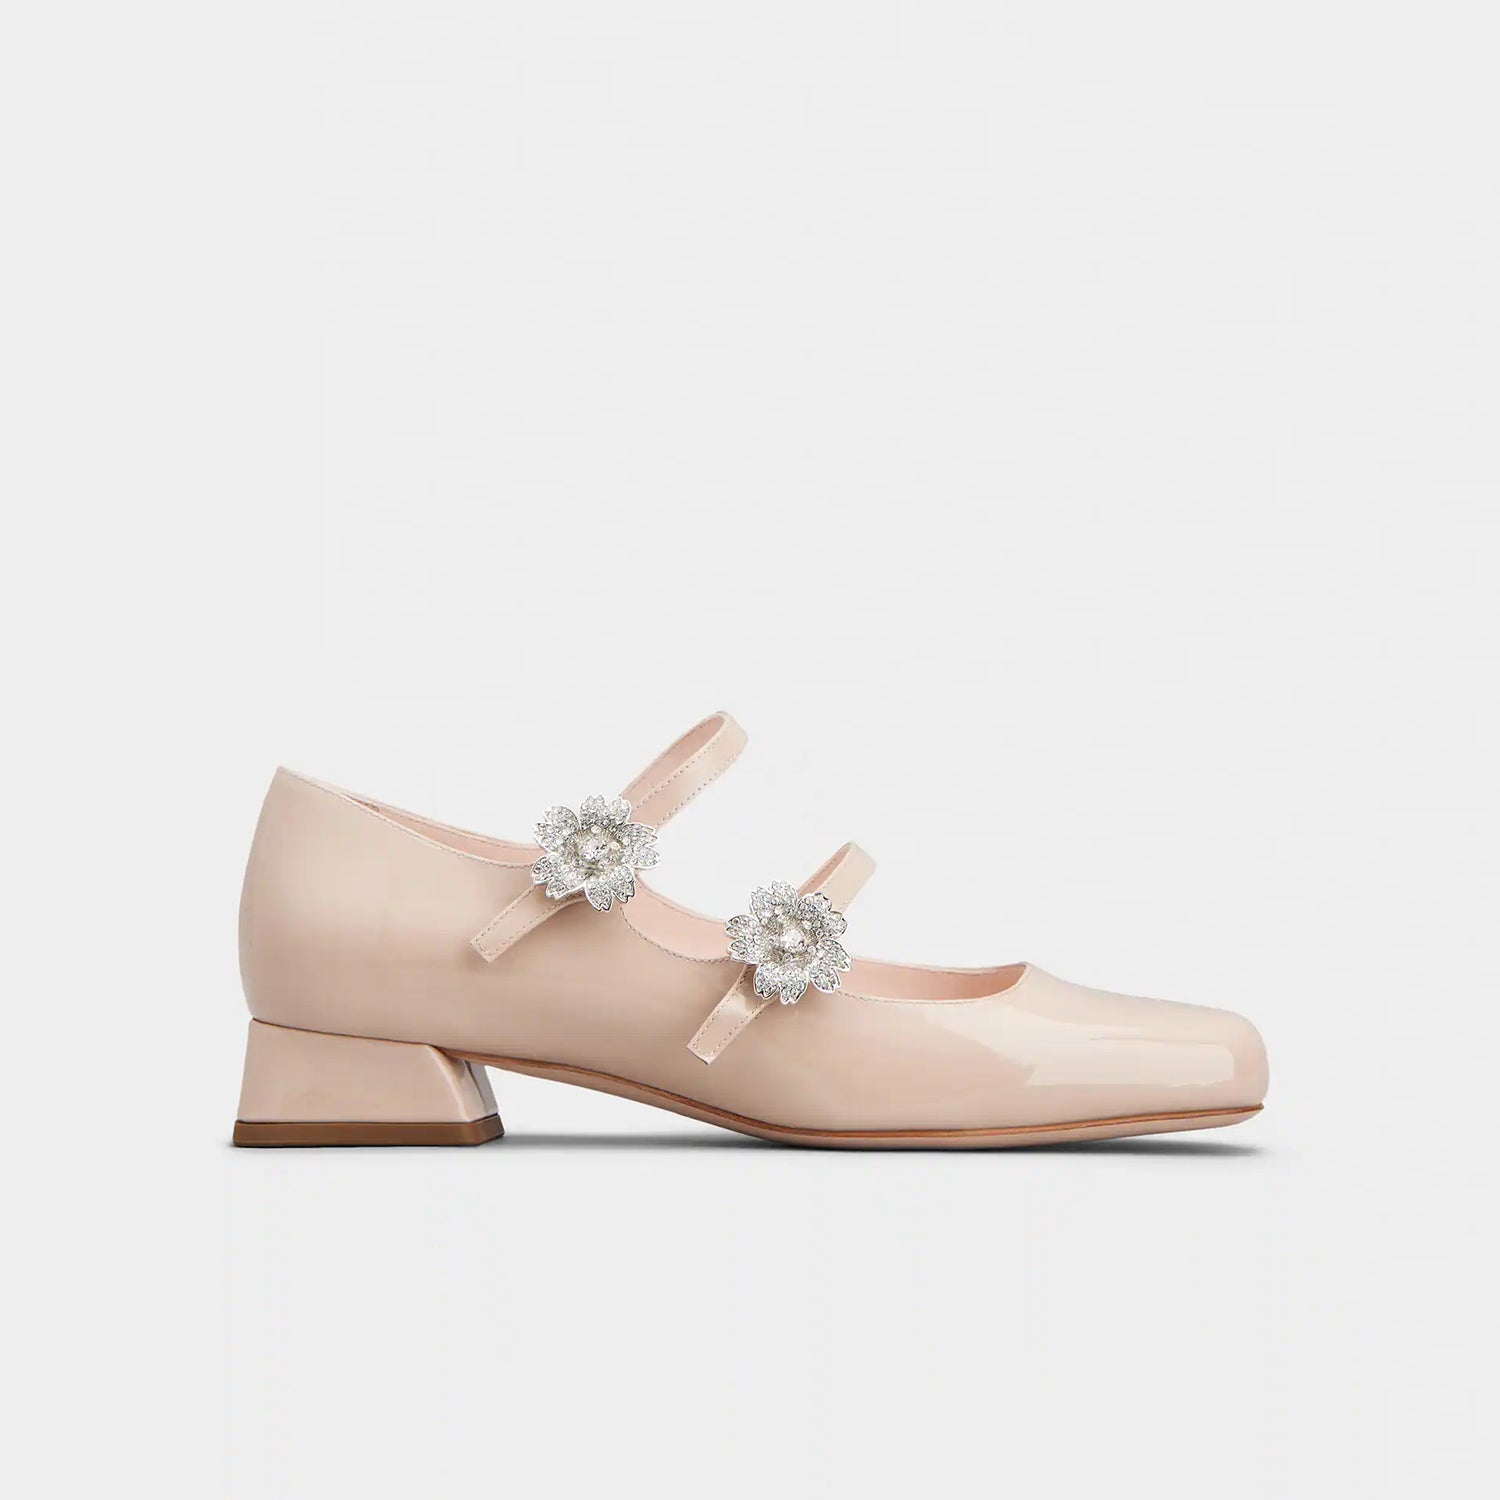 Bouquet Strass Babies Ballerinas in Patent Leather